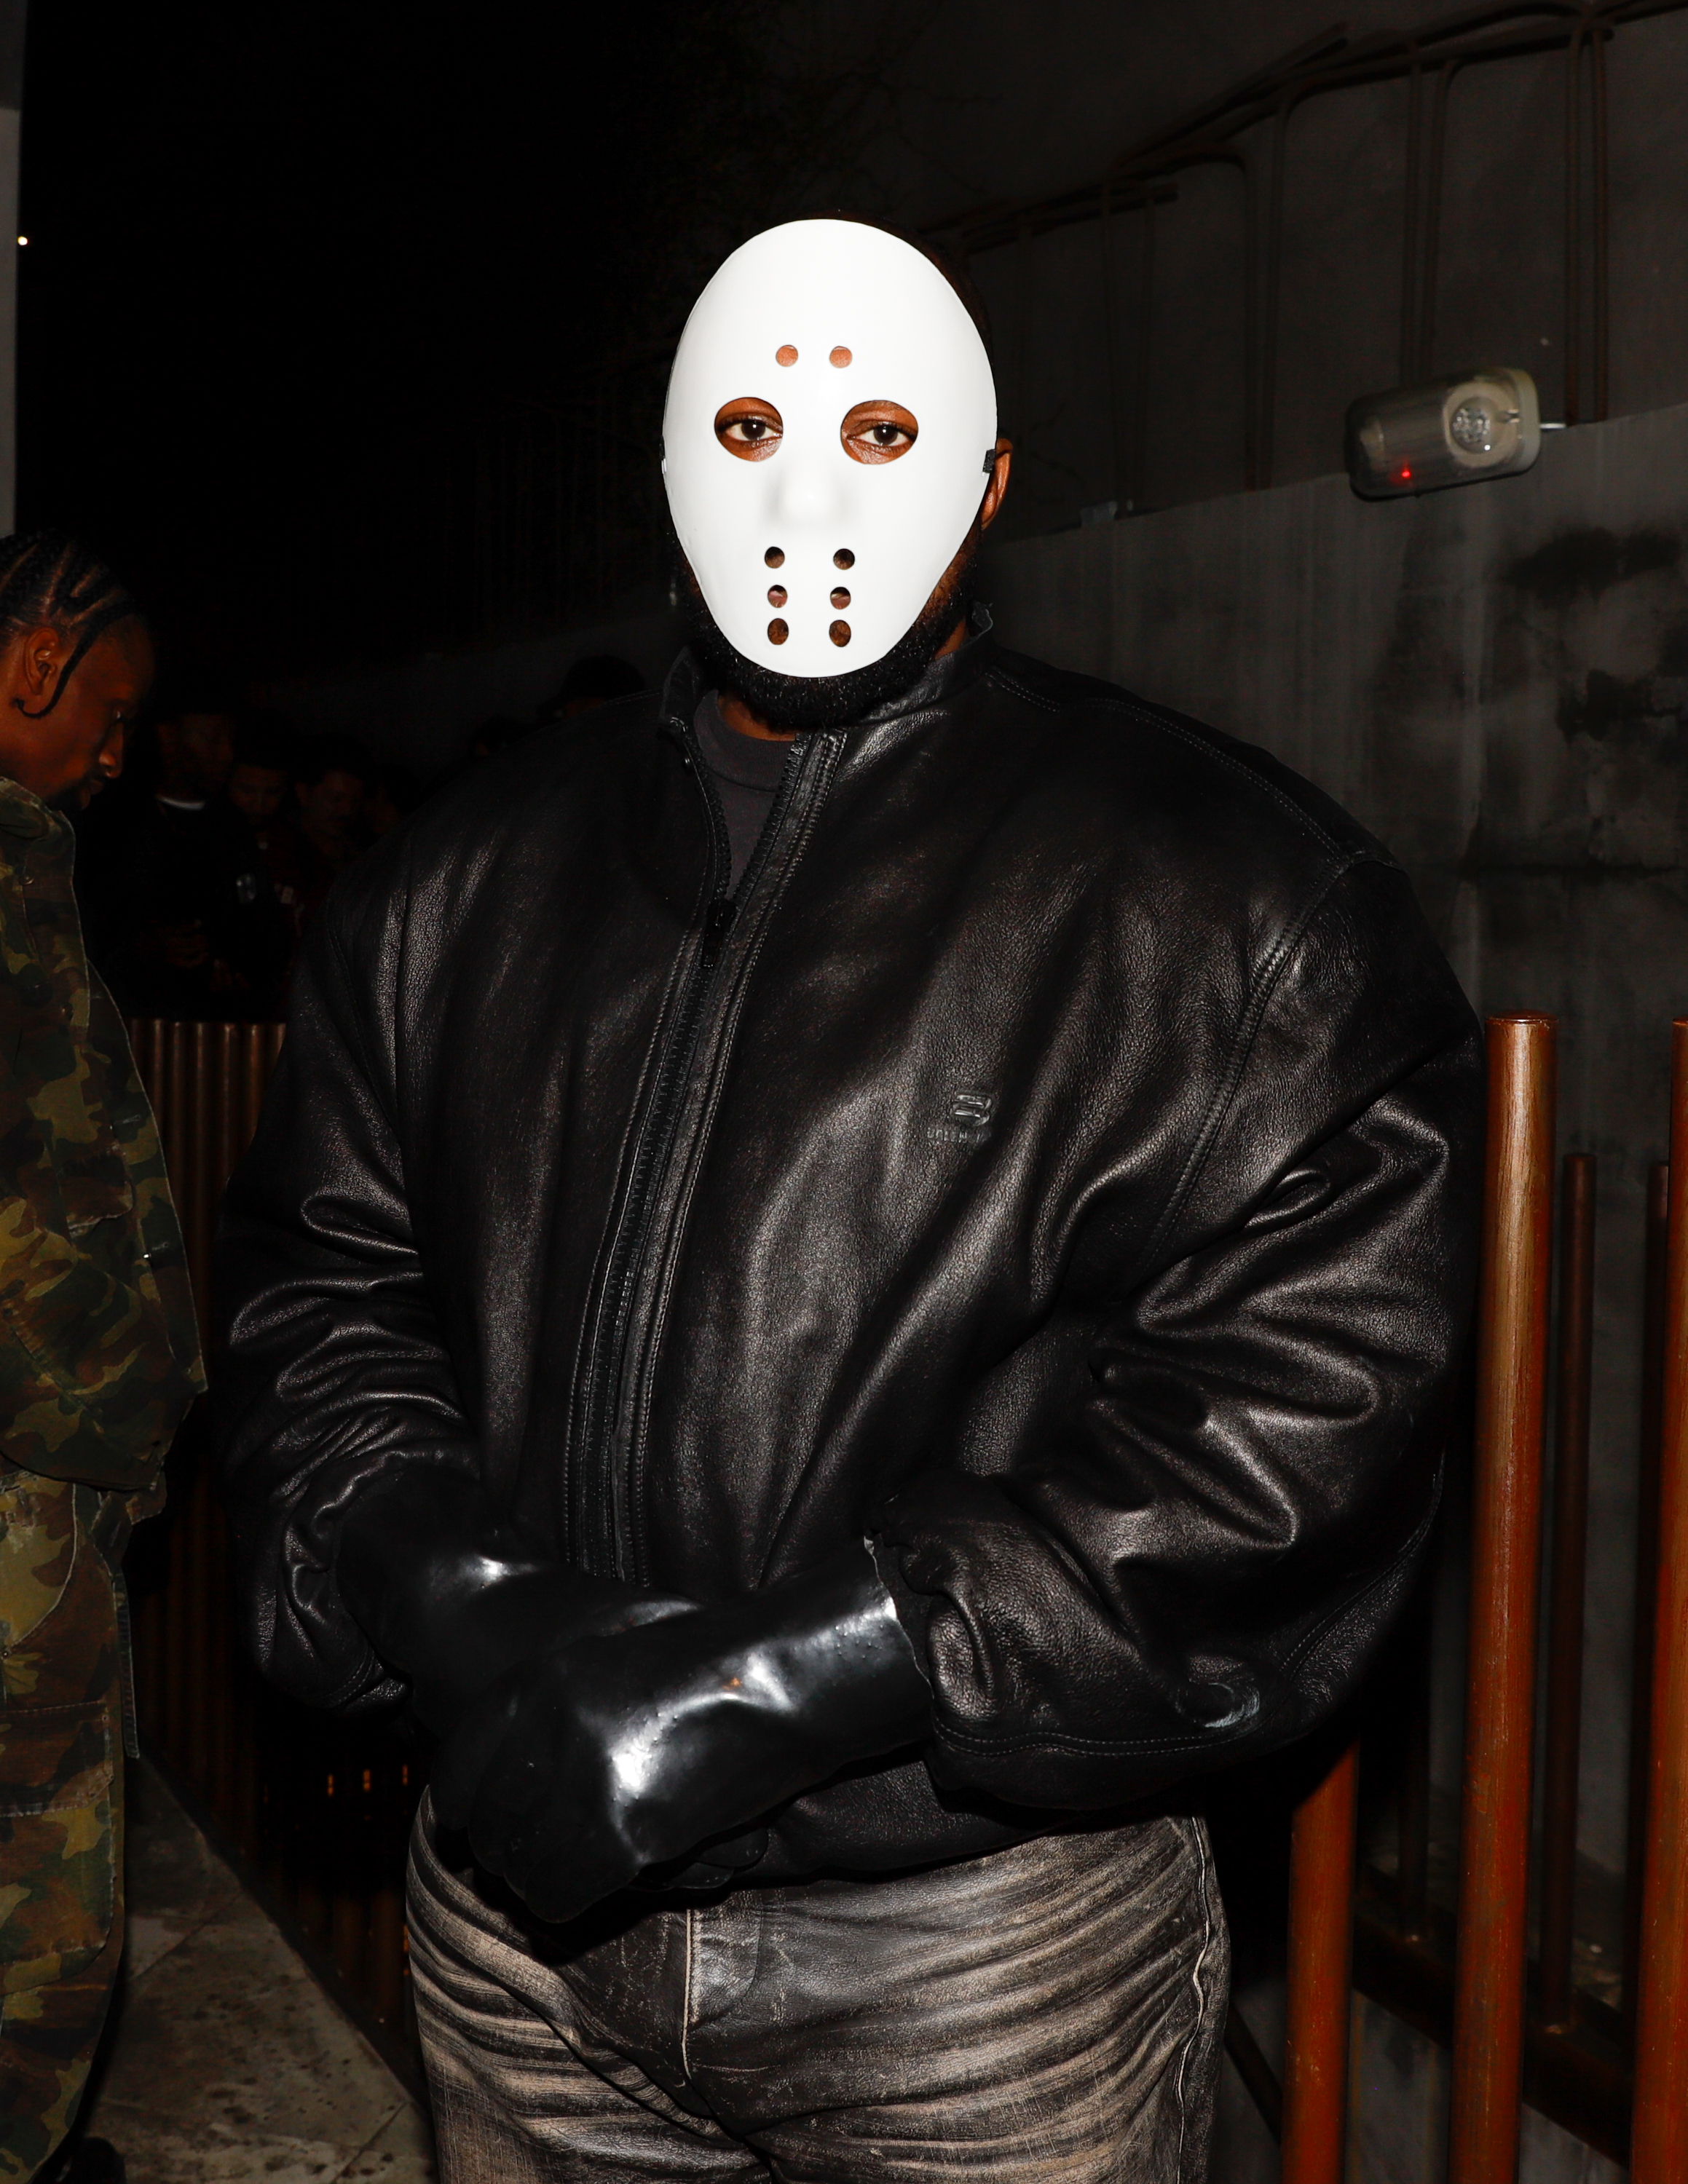 Kanye wore a mask at the grand opening of the 424 store